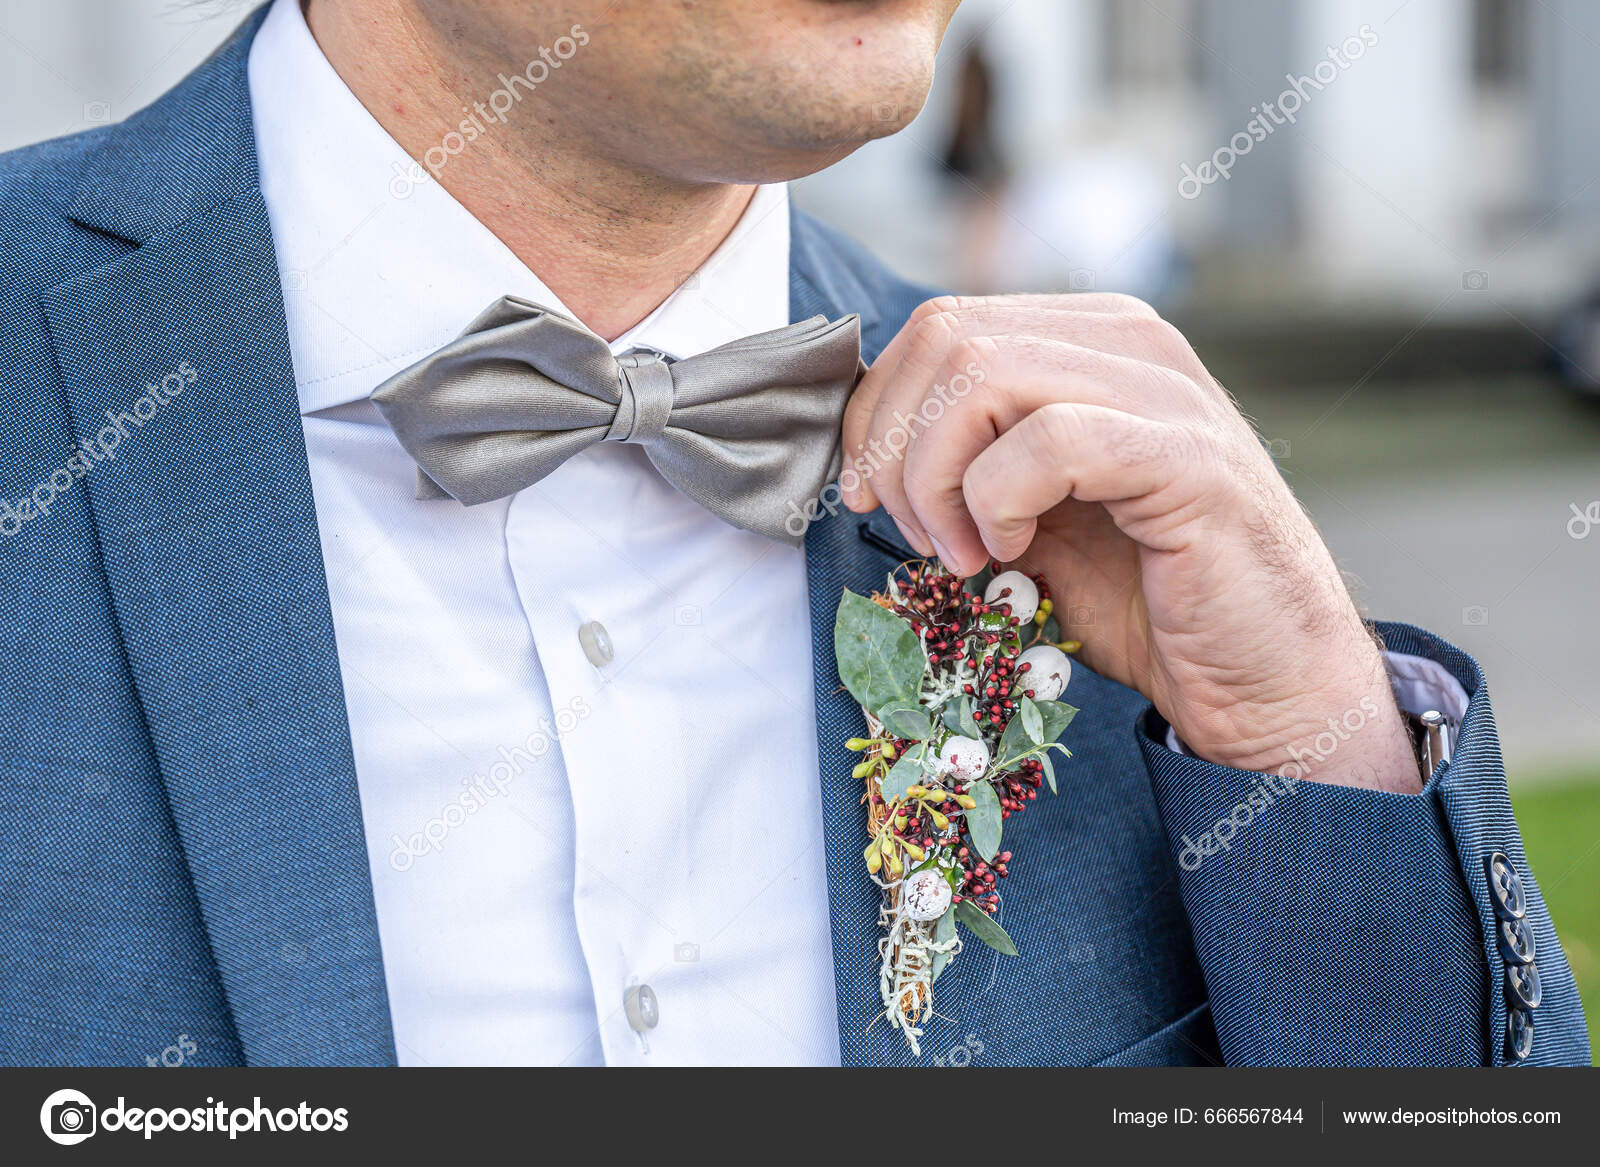 Boutonniere Flower Groom Wedding Outfit Coat Bow Tie Stock Photo by ©donogl  666567844